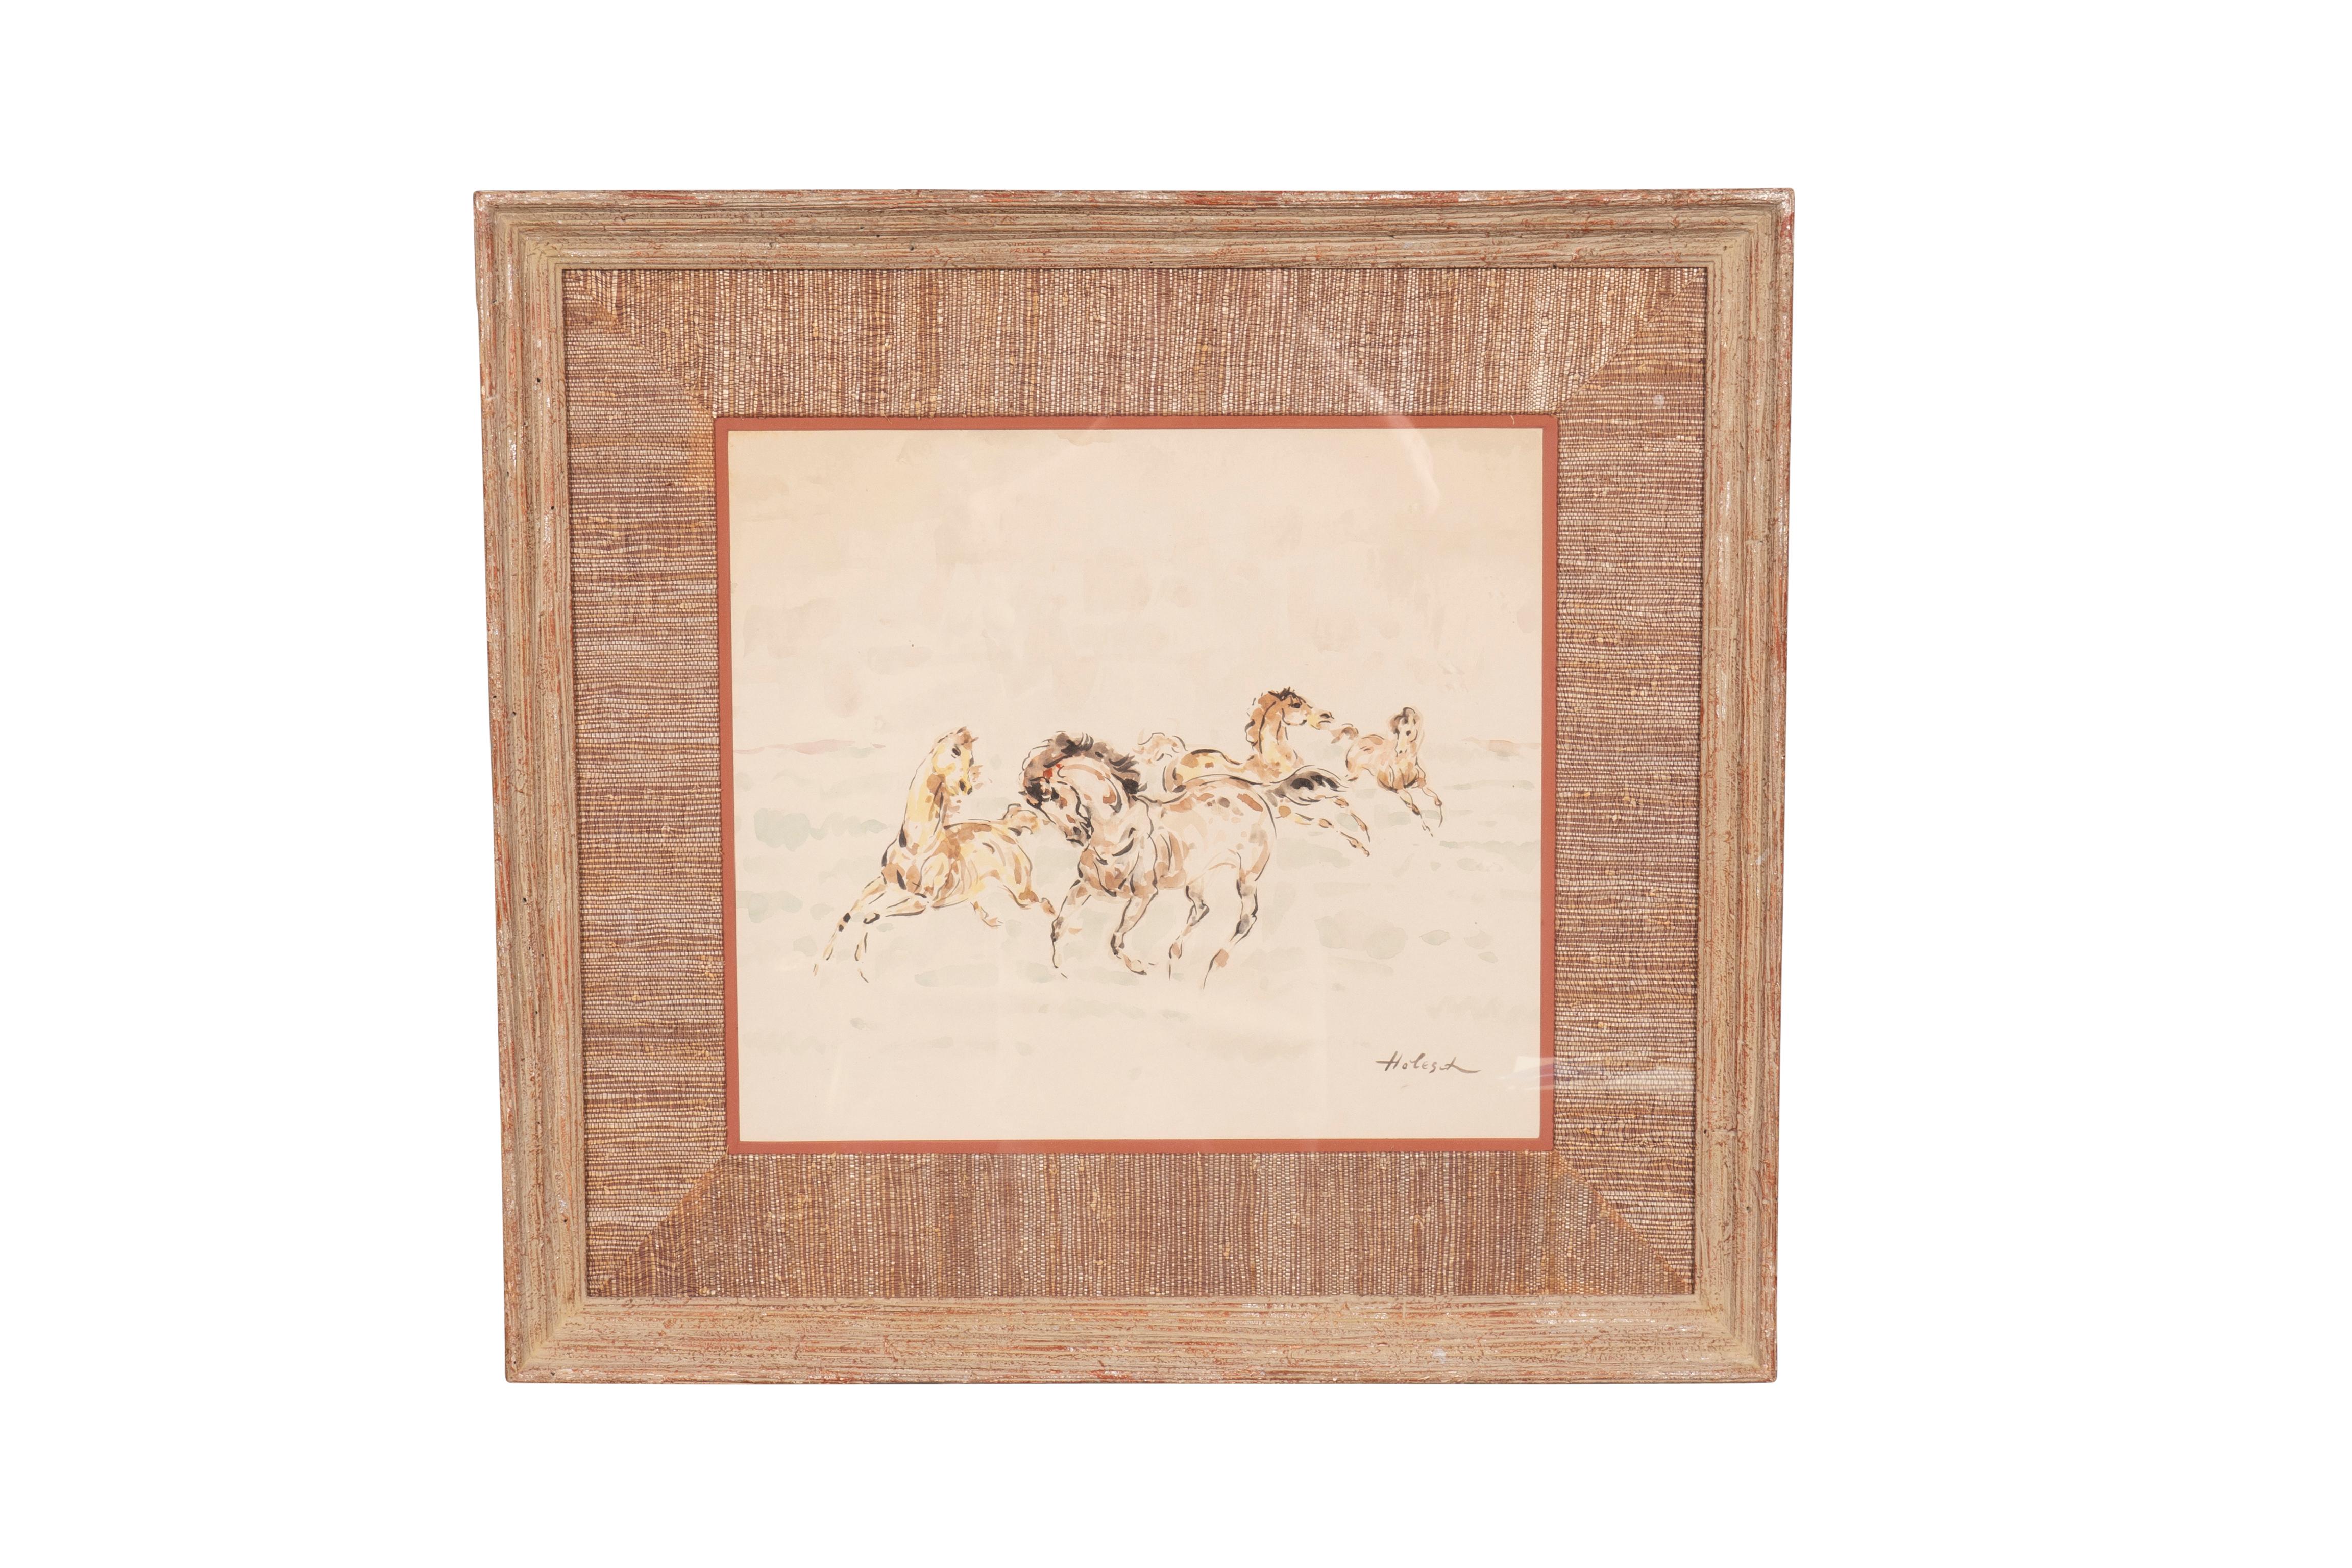 A Hungarian painter who moved to America. Years 1910-1983. Artist specialized in equestrian subjects. Framed with a bleached wood and grasscloth frame. Signed lower right. 